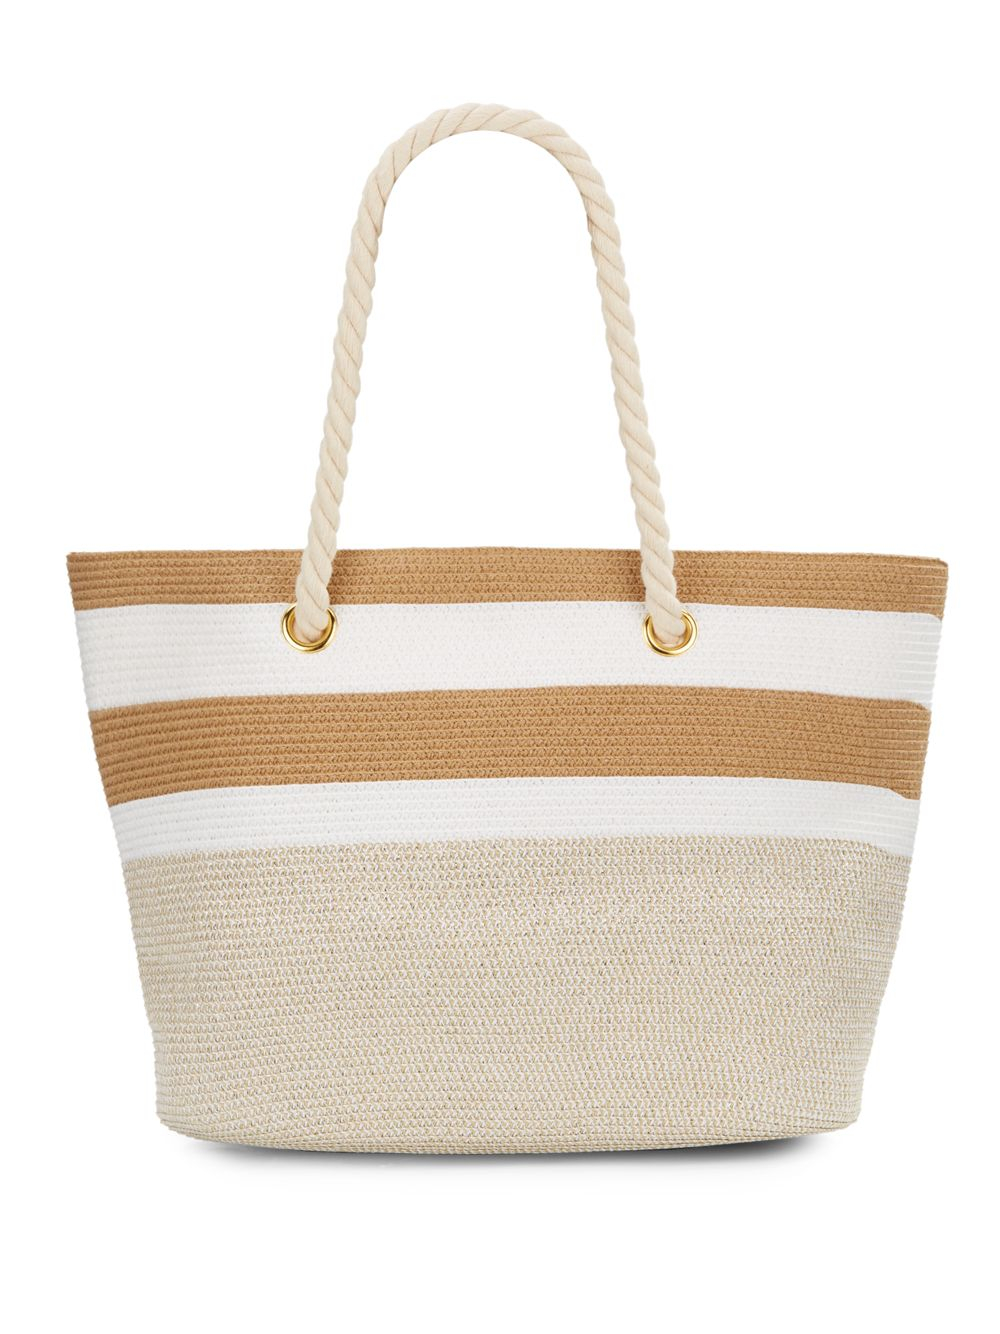 Saks fifth avenue Rope Handle Straw Tote in Natural | Lyst